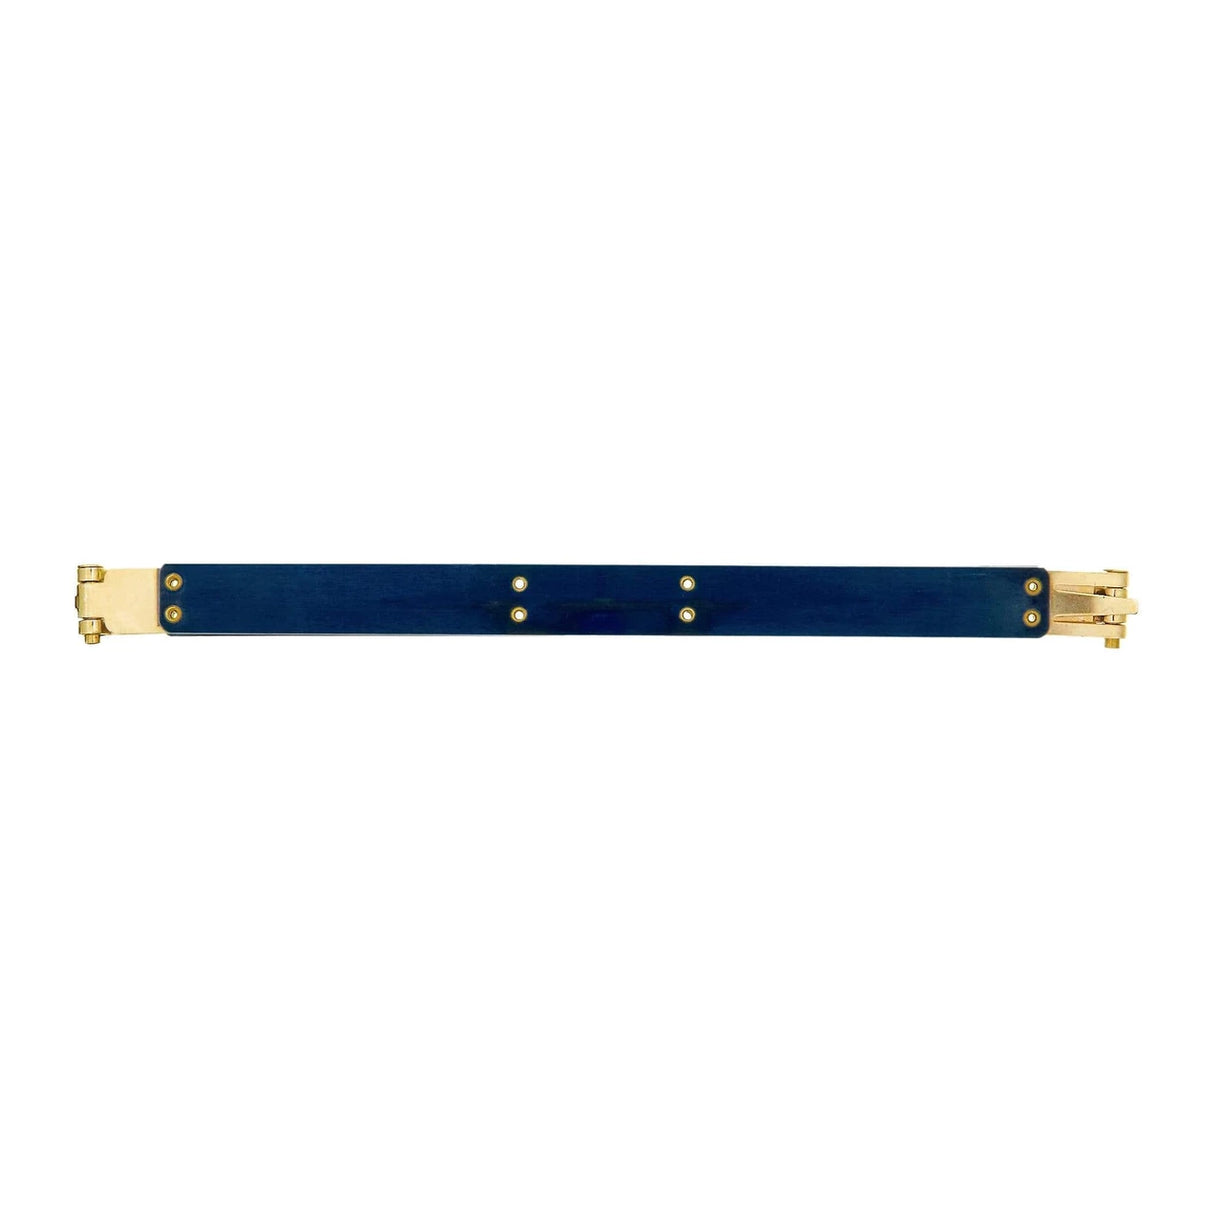 9", Facile Hexagonal Frame with Brass Hinges, Steel, #A-44-9